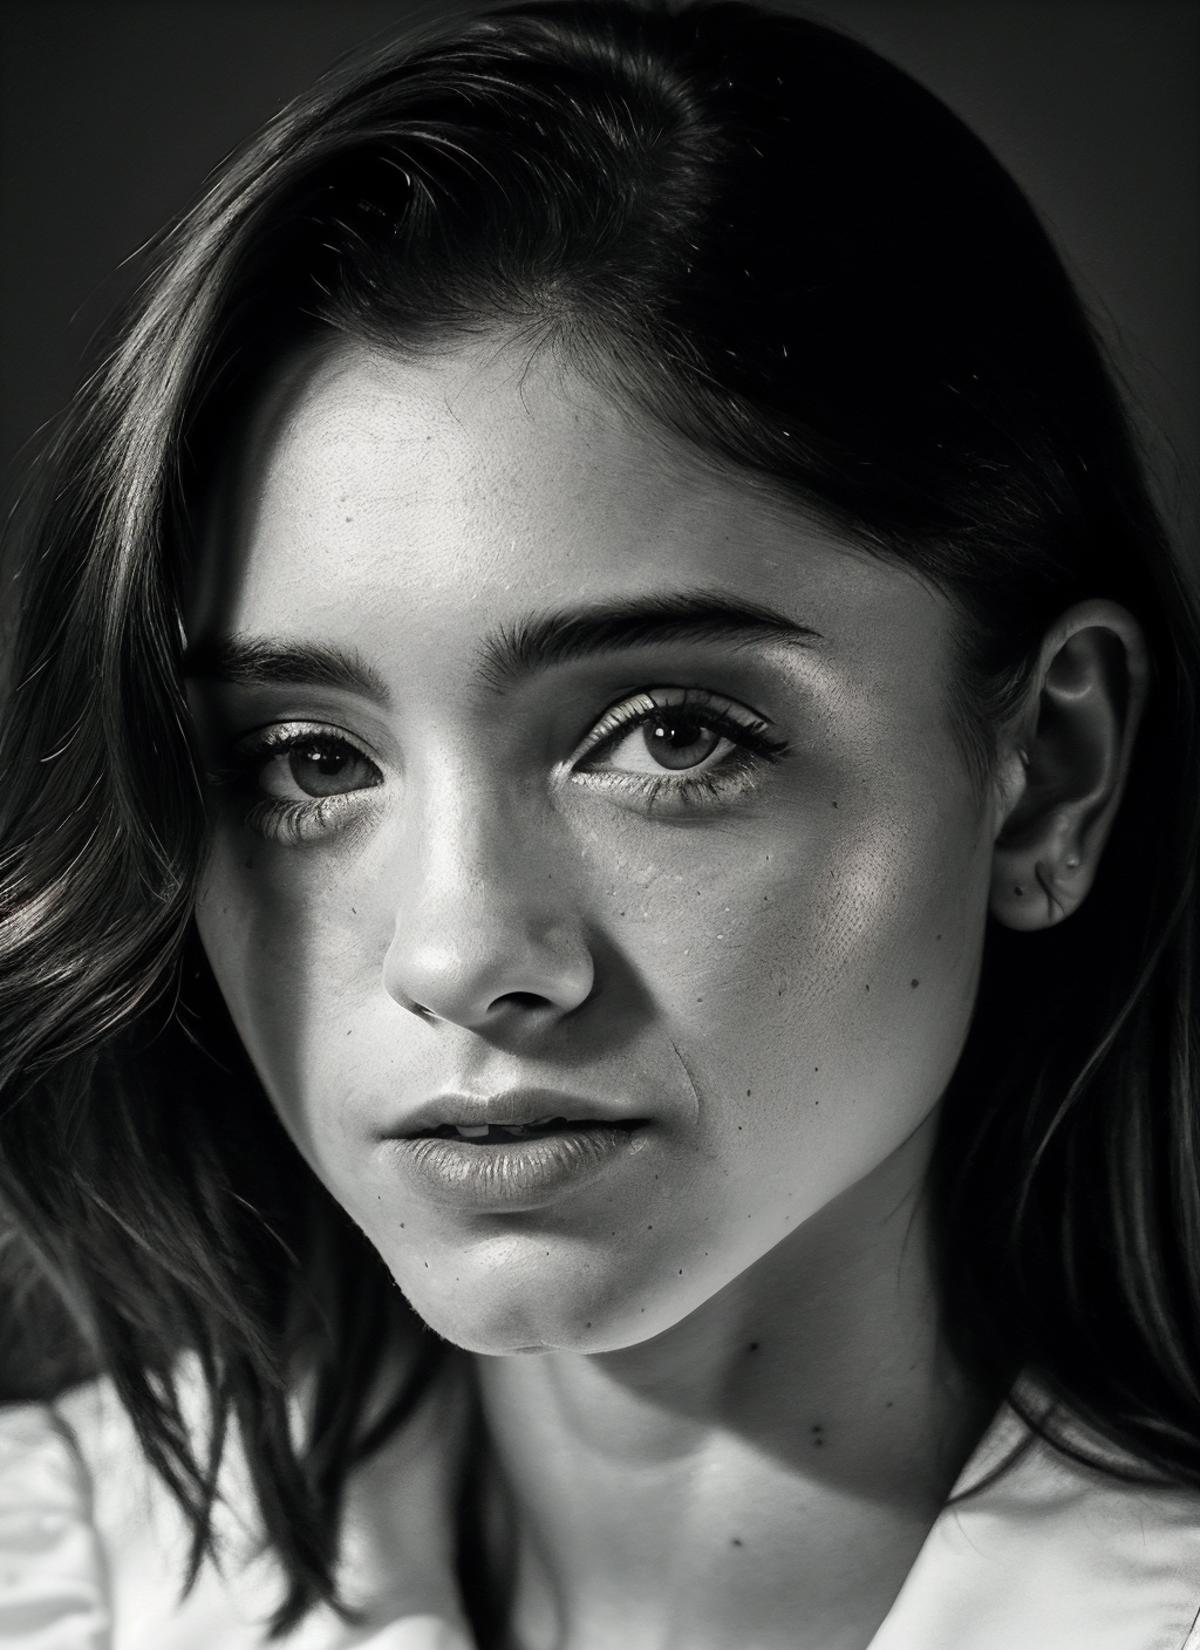 Natalia Dyer (Nancy Wheeler from Stranger Things TV show) image by ceciliosonata390